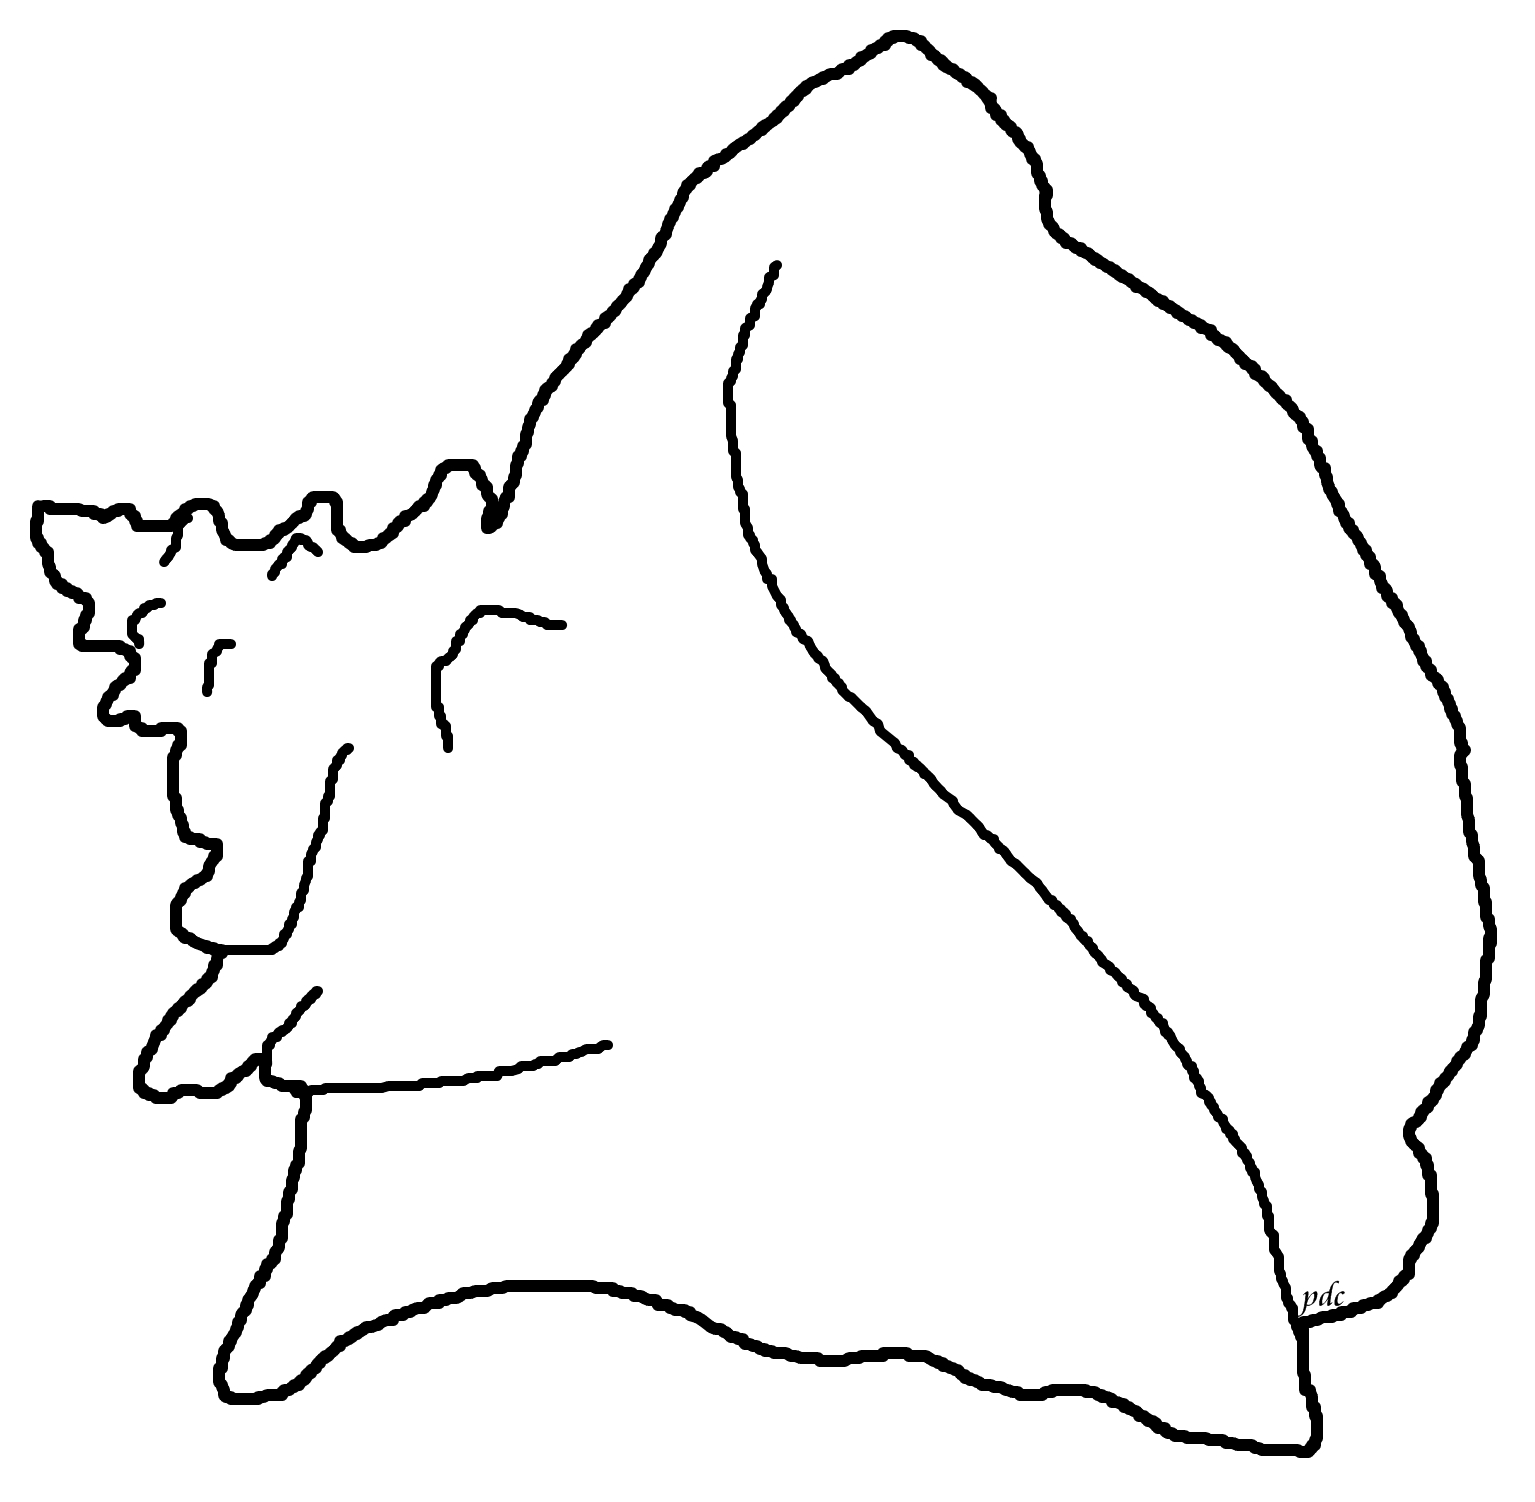 Queen -or Pink- Conch Coloring Page | Seashells by Millhill